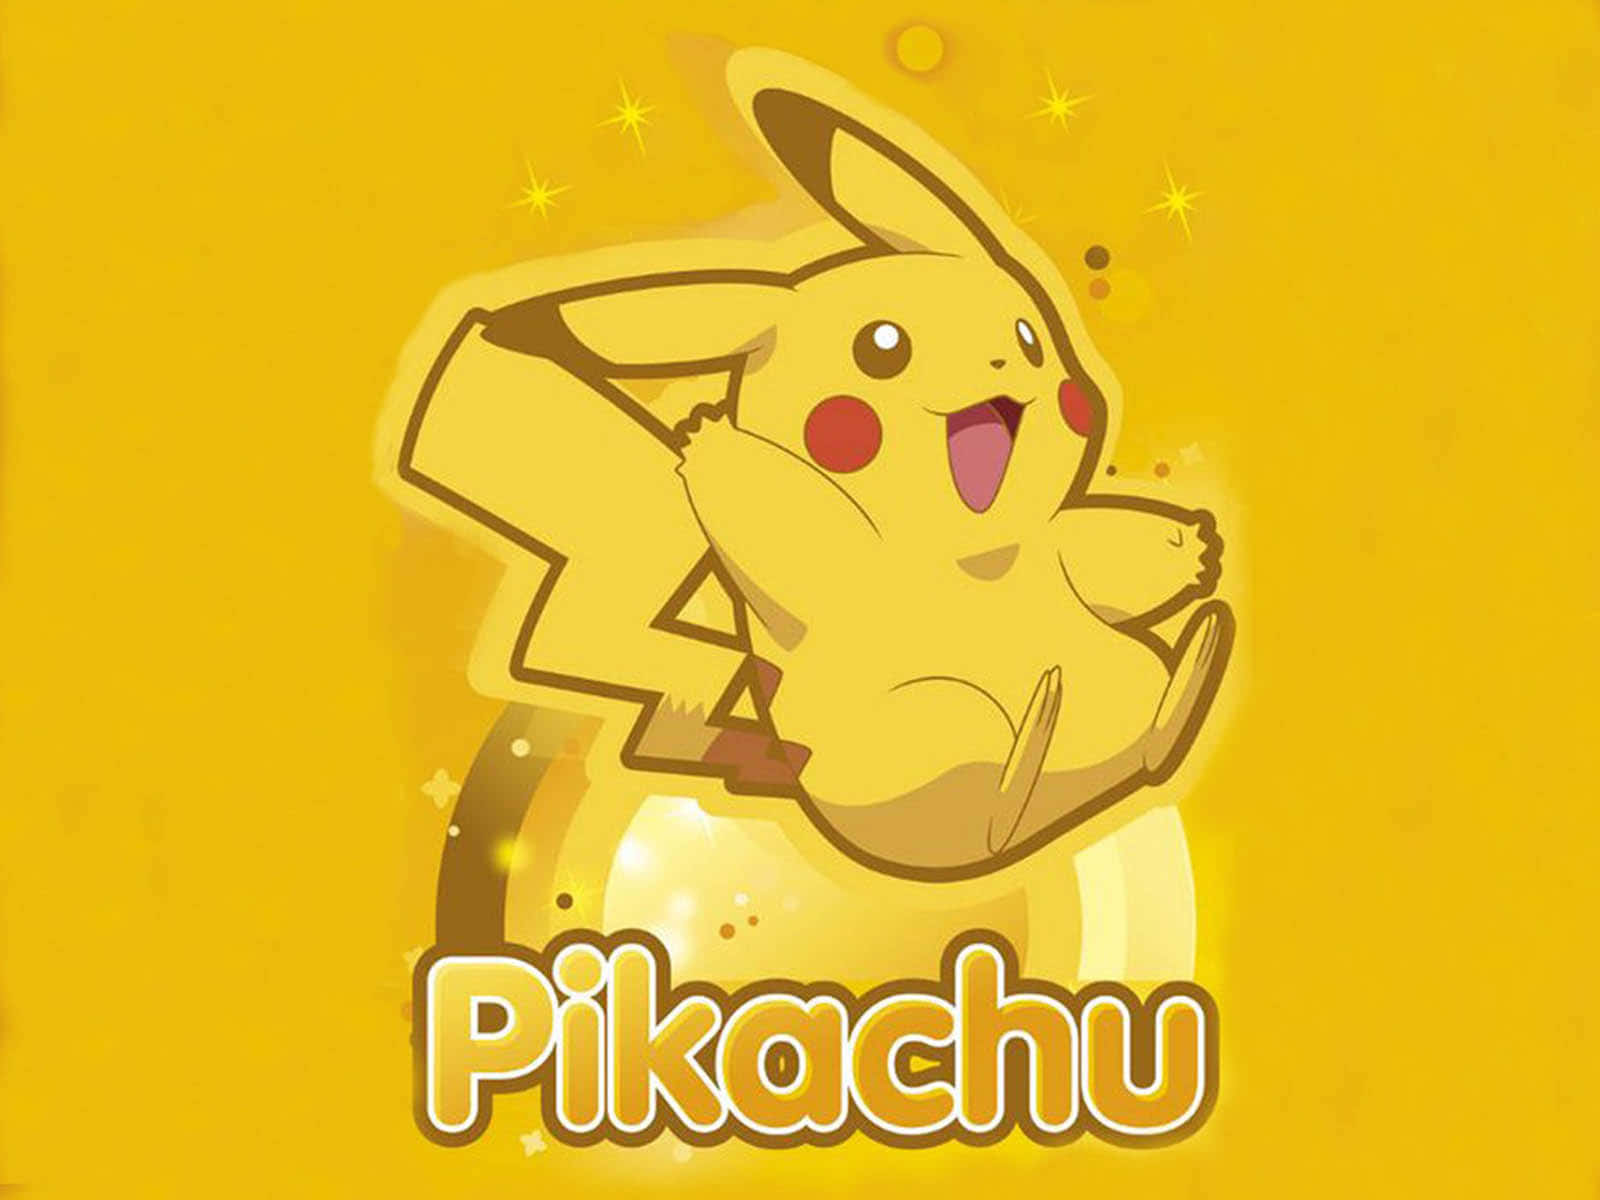 400+] Pikachu Pictures